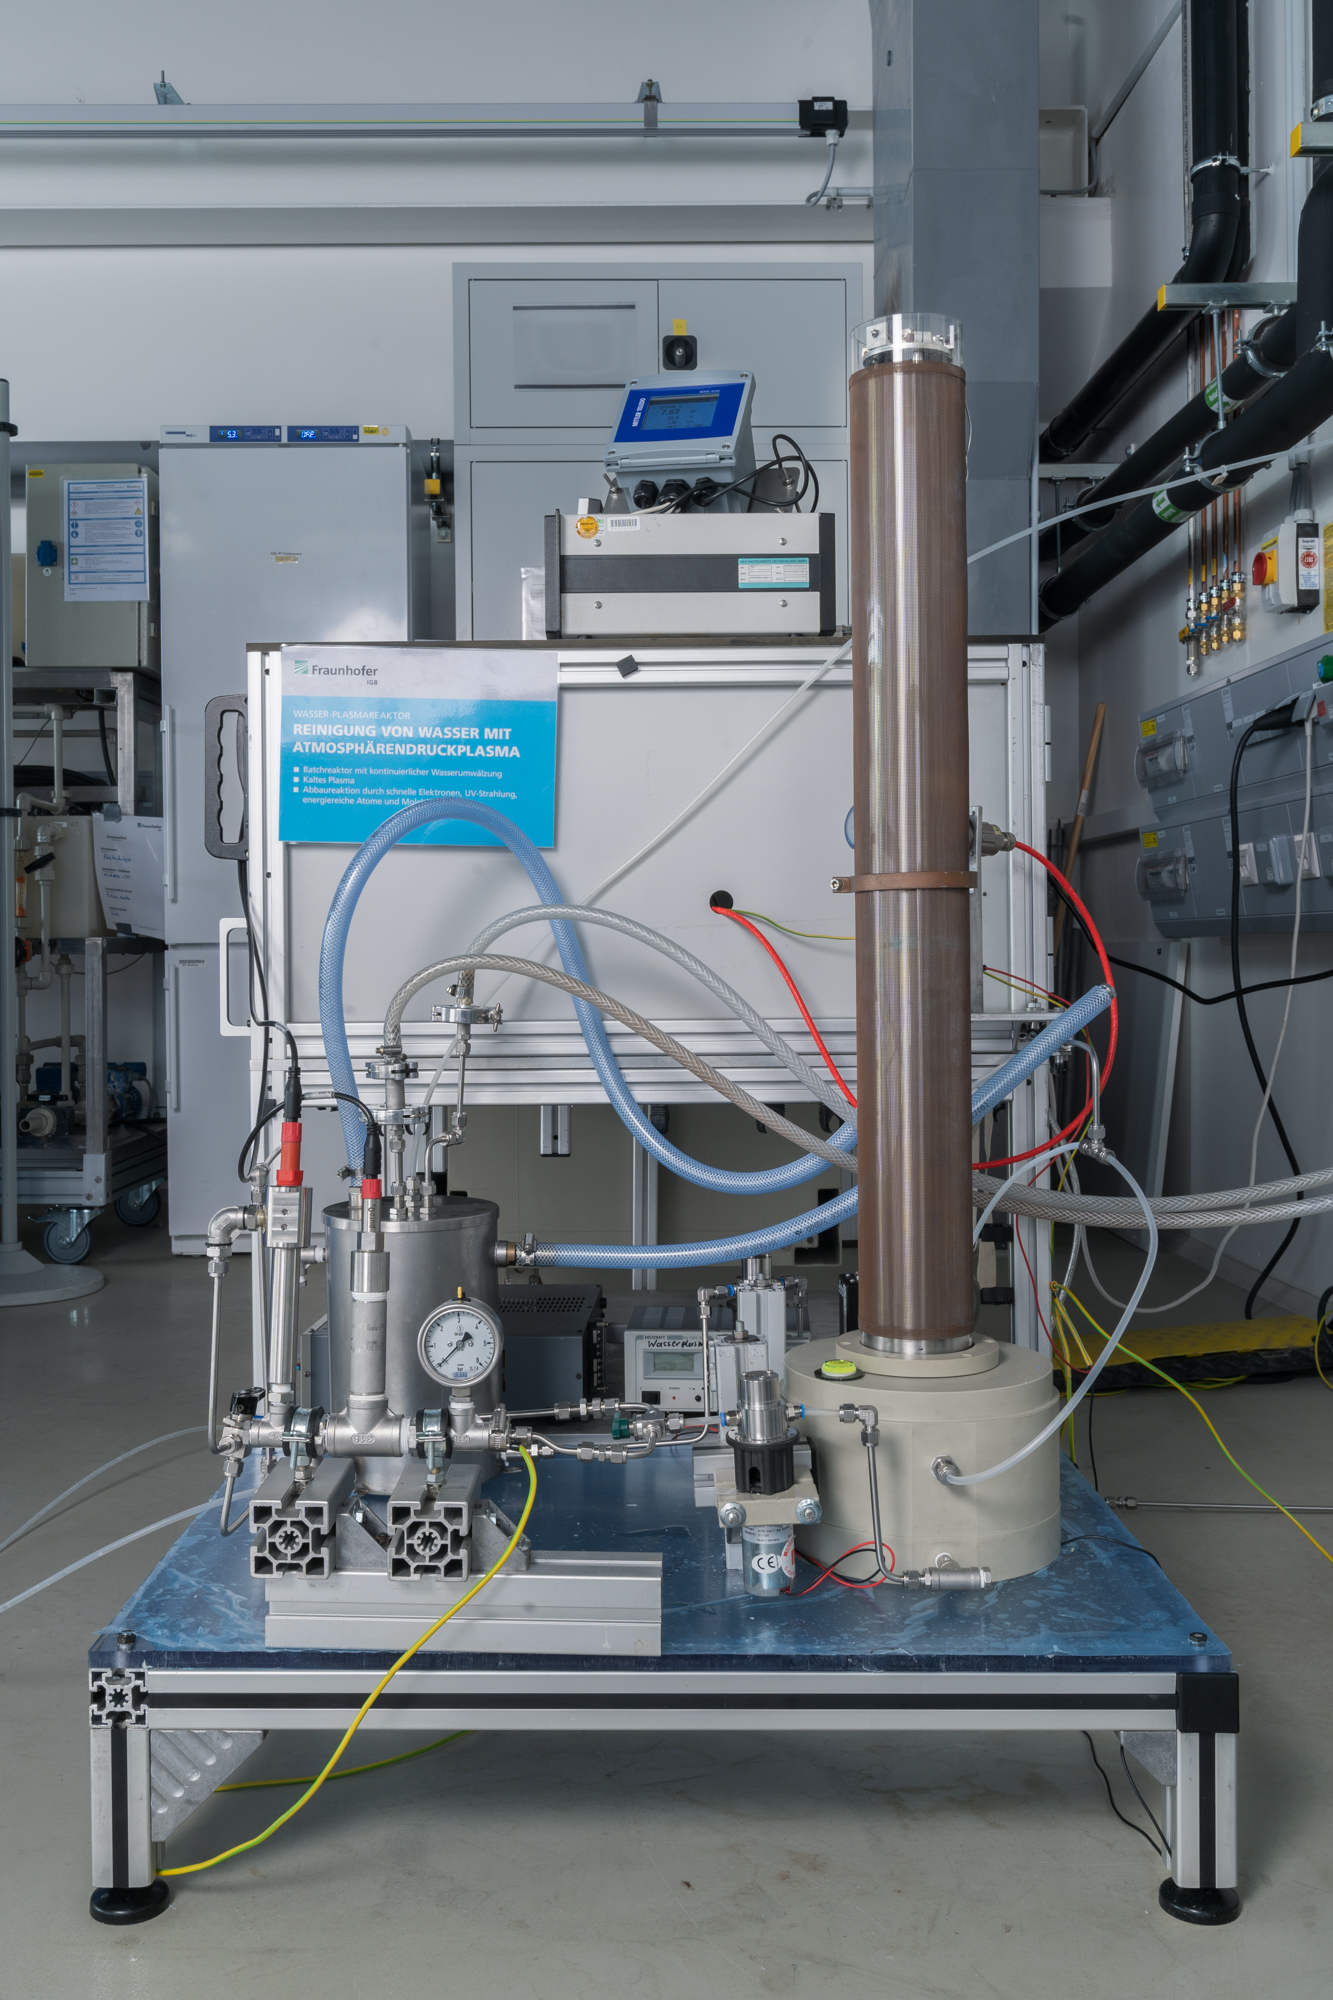 Pilot plant for the elimination of PFAS. Following the initial success of the trials, the technology is now to be optimized and scaled up for practical applications on an industrial scale.